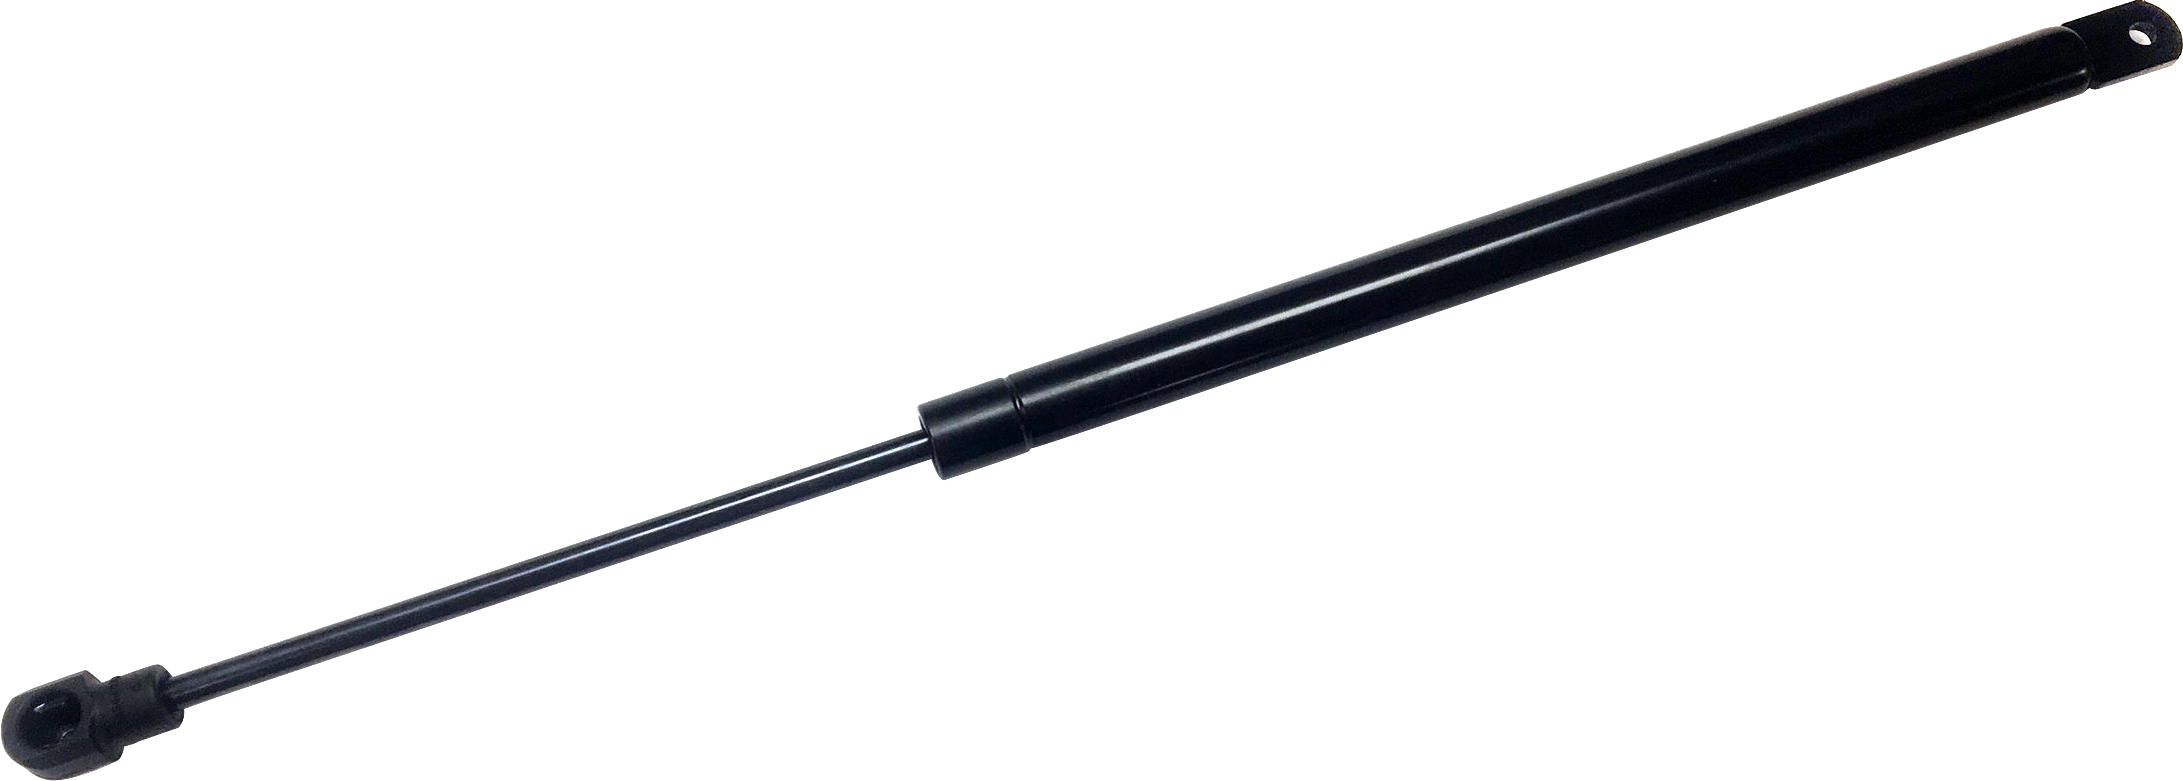 One New Tuff Support Back Glass Lift Support 613400 for Infiniti for Nissan